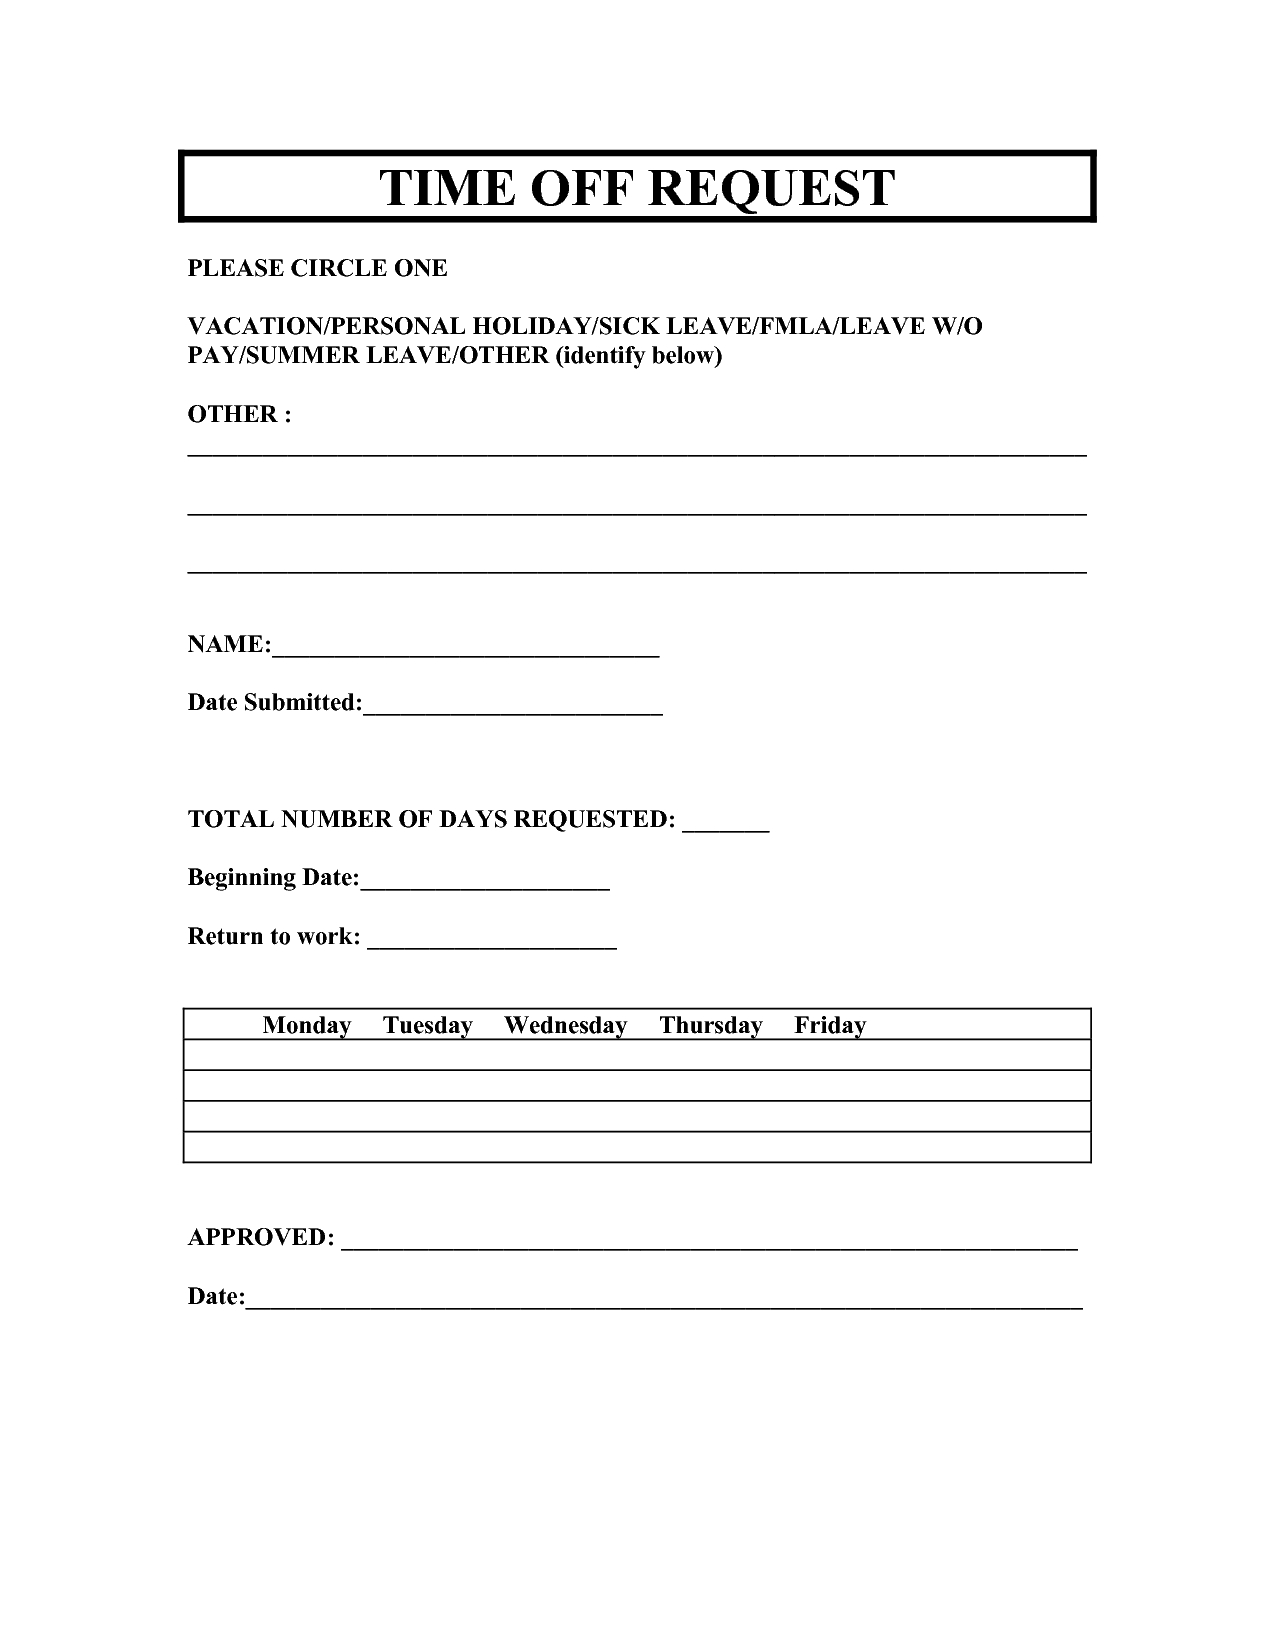 Vacation Request Forms 2014 Free Printable | Printable Request For - Free Printable Hr Forms